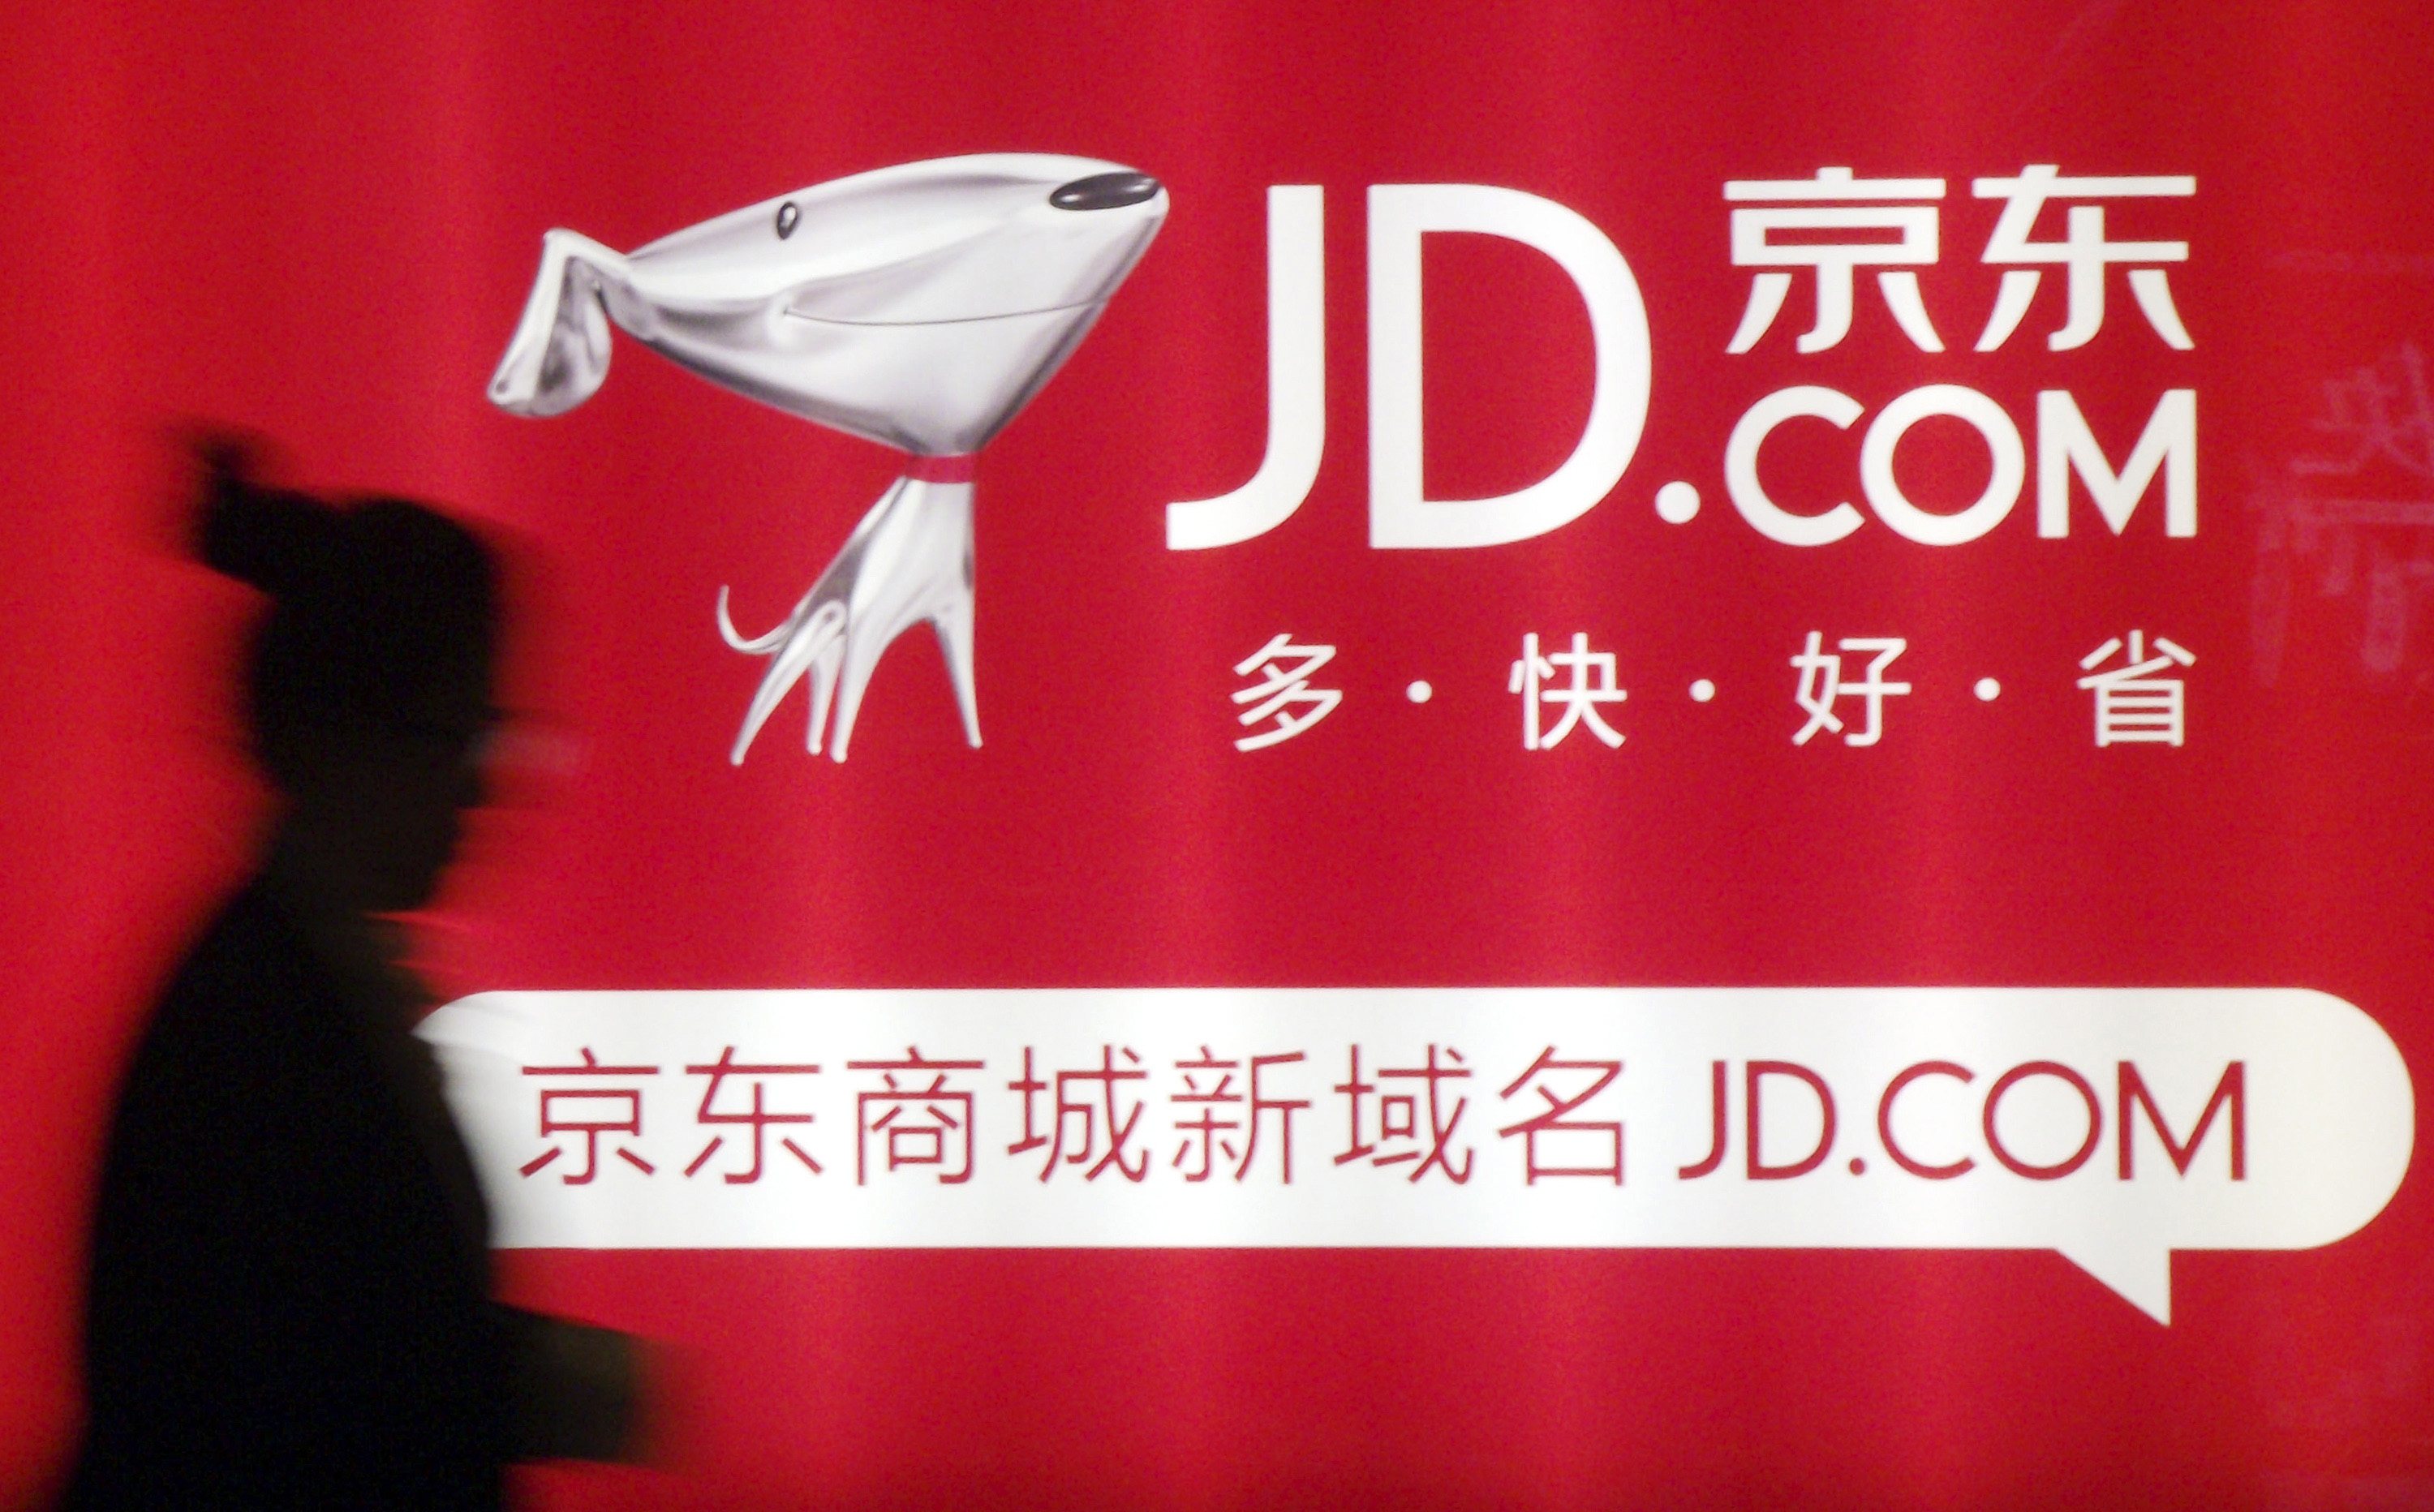 Originally specialising in electronics, JD.com is seeking to expand its e-commerce offerings. Photo: Reuters